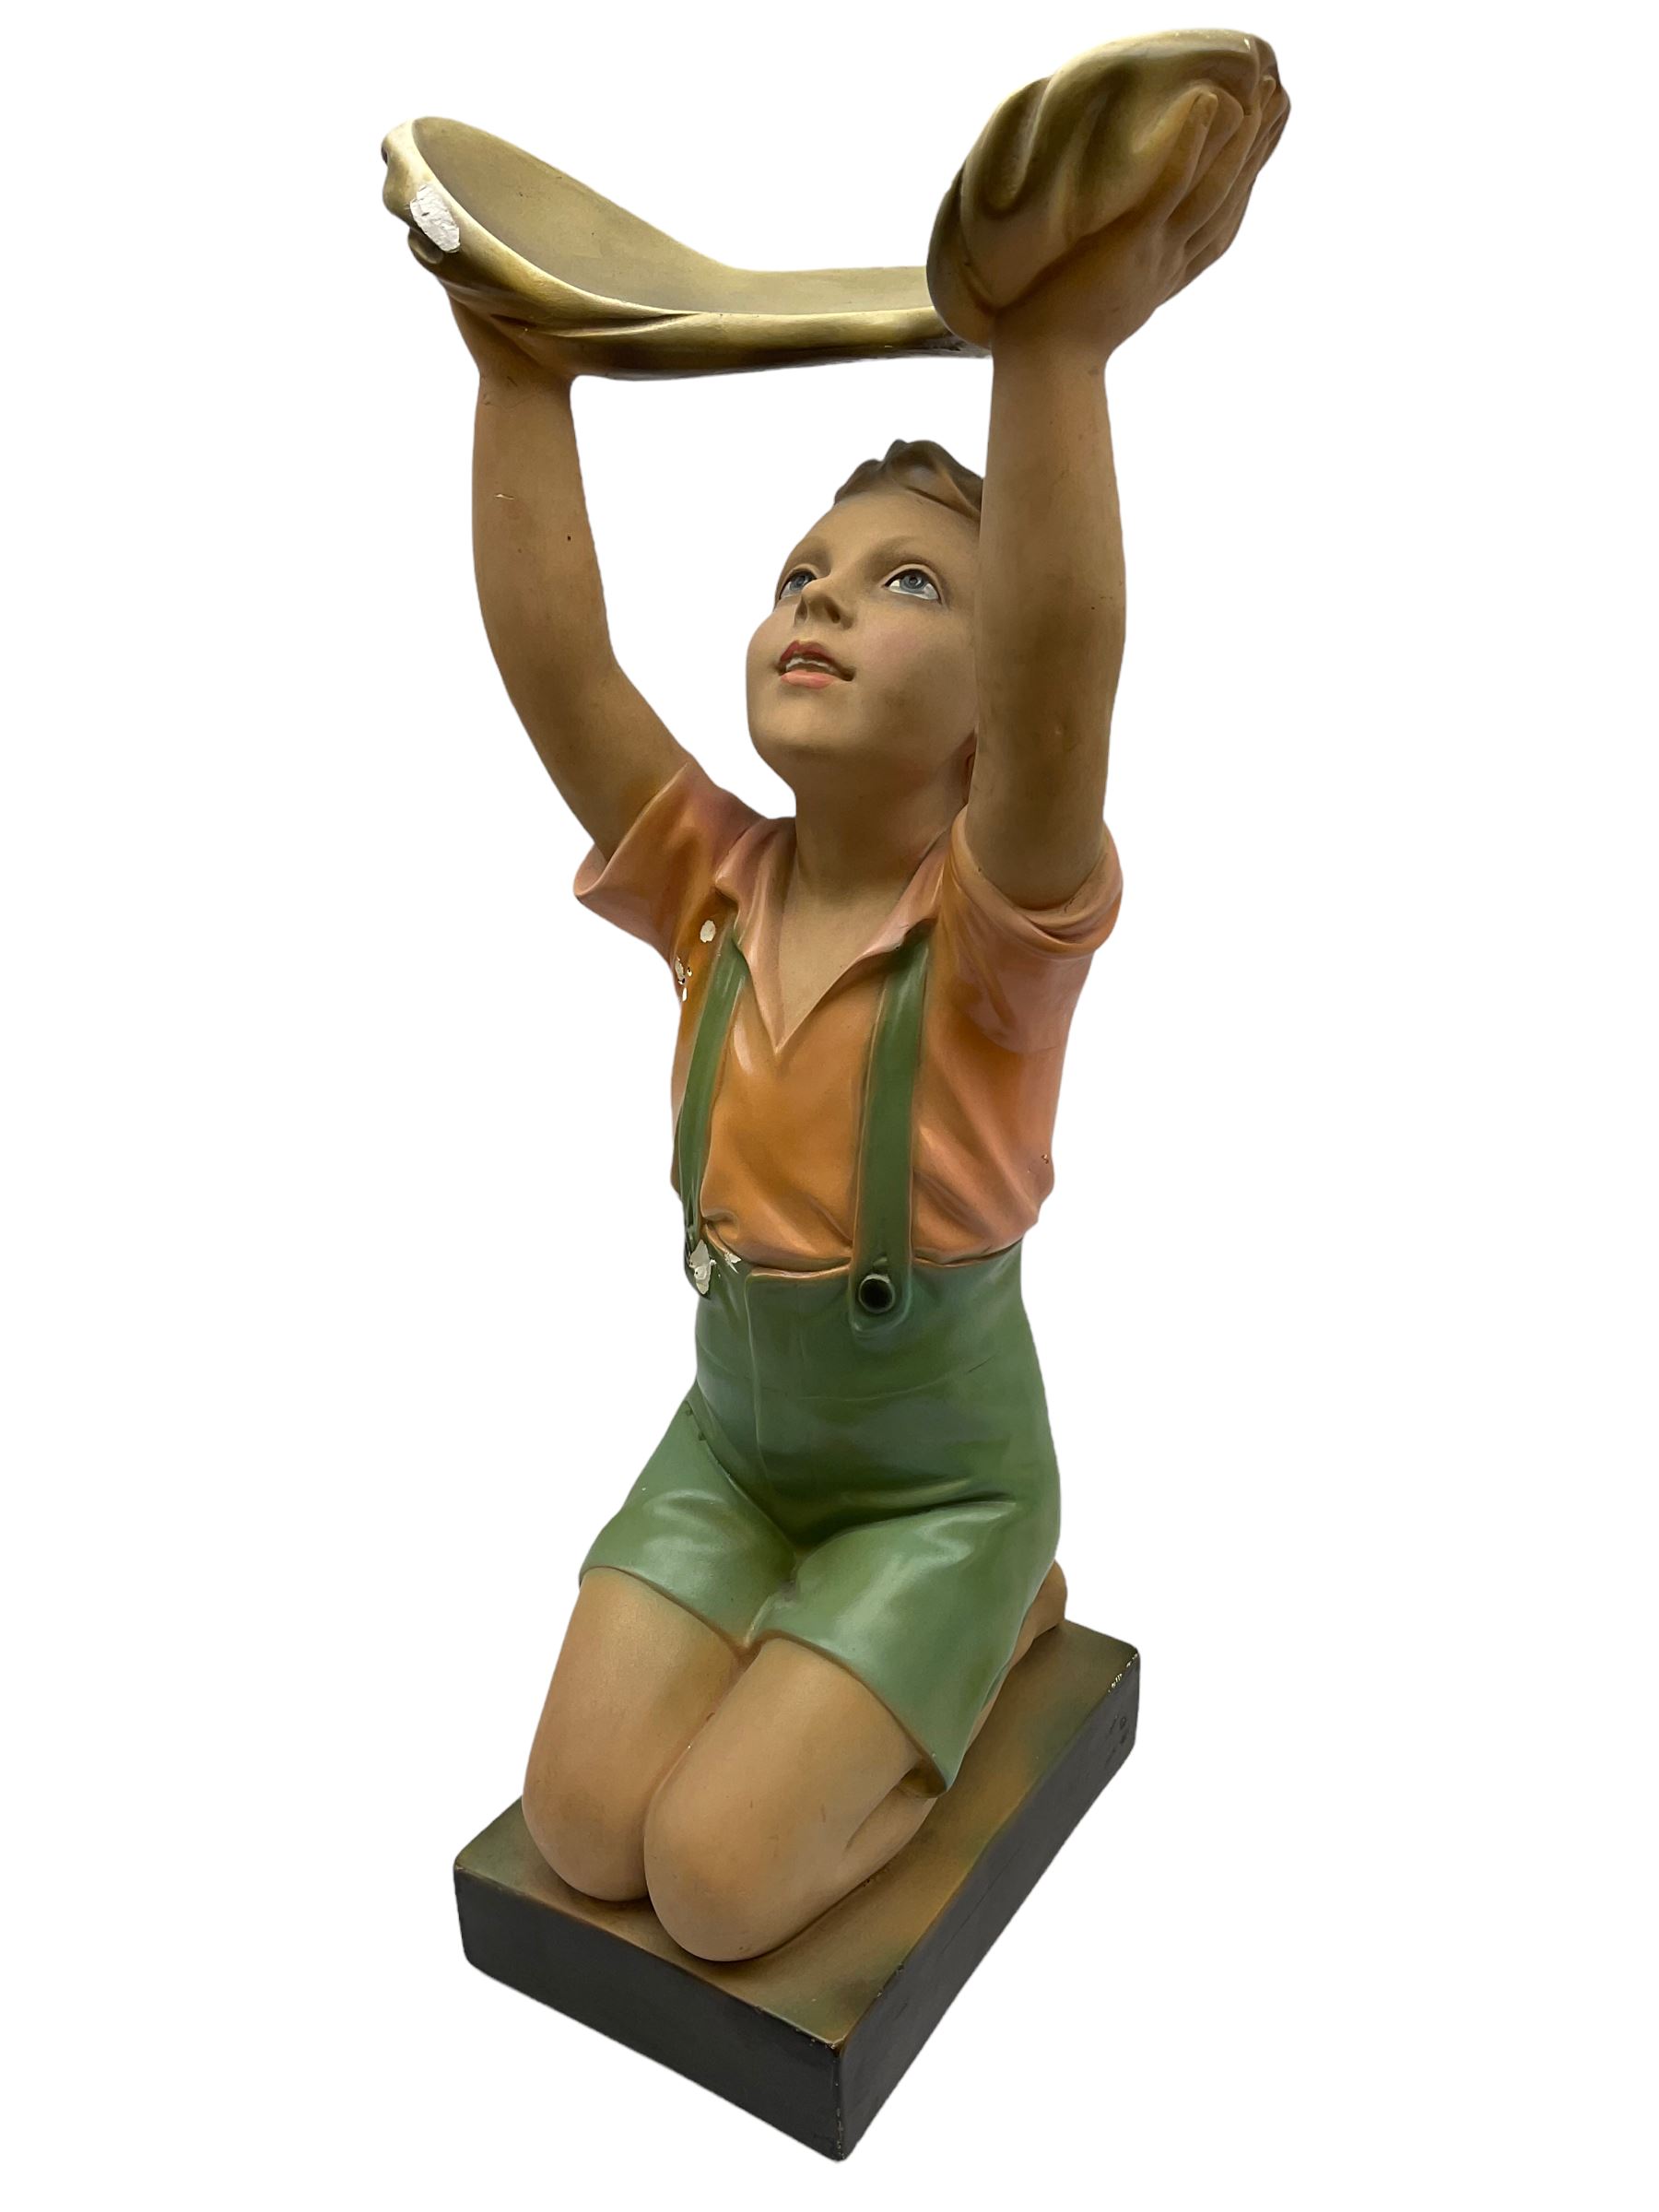 Art Deco plaster figure modelled as a young boy kneeling with his arms above his head holding a dish